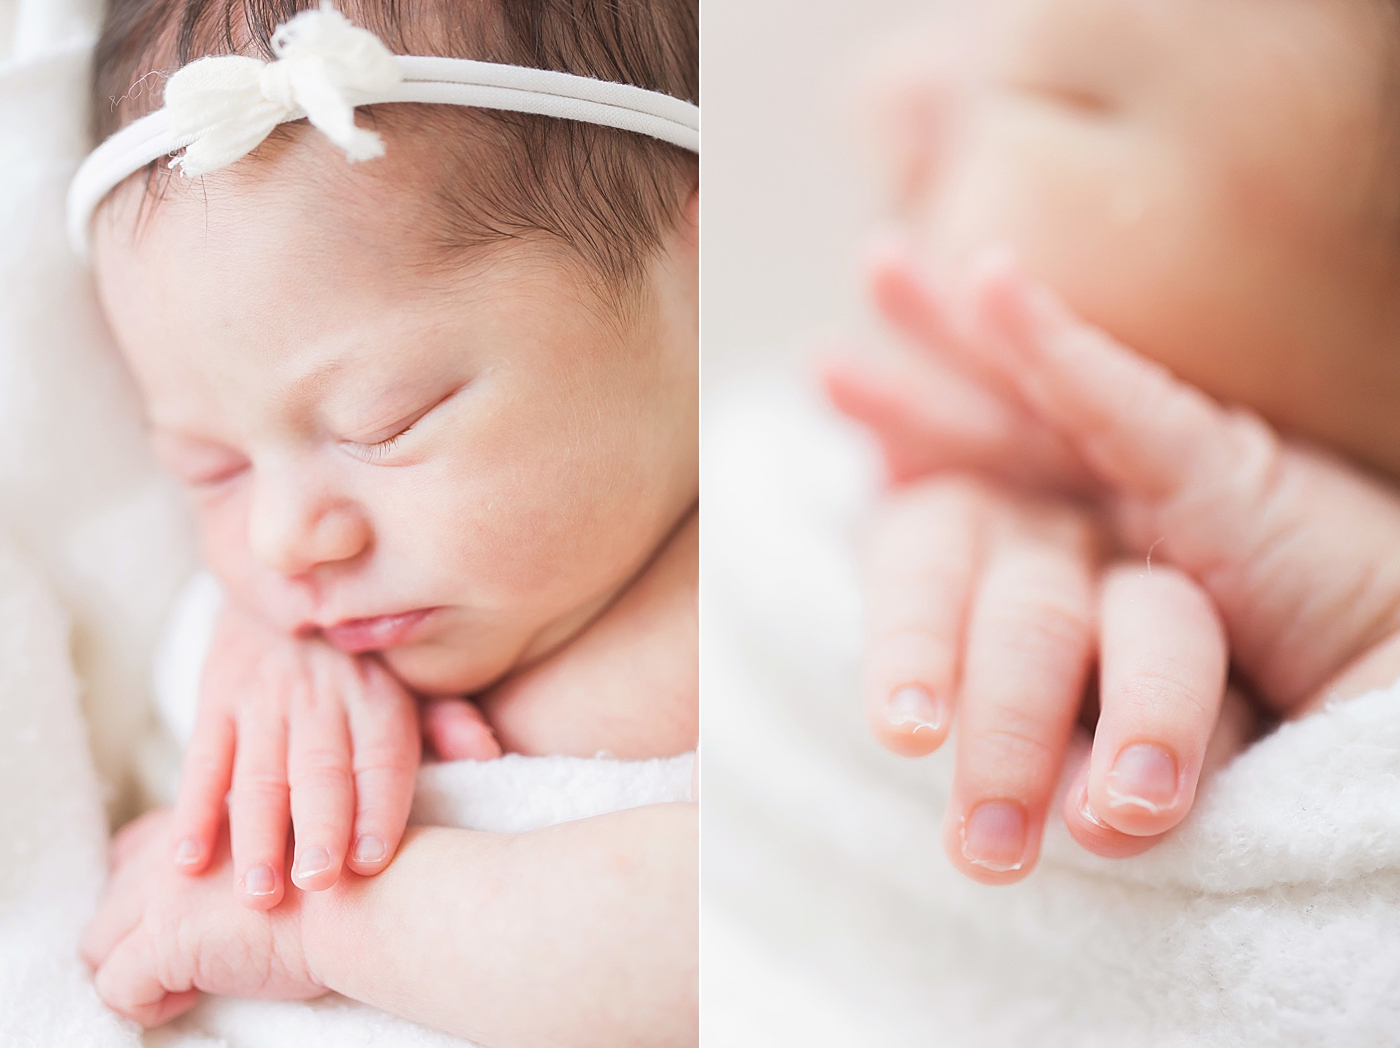 Baby details of fingers. Photo by Fresh Light Photography.